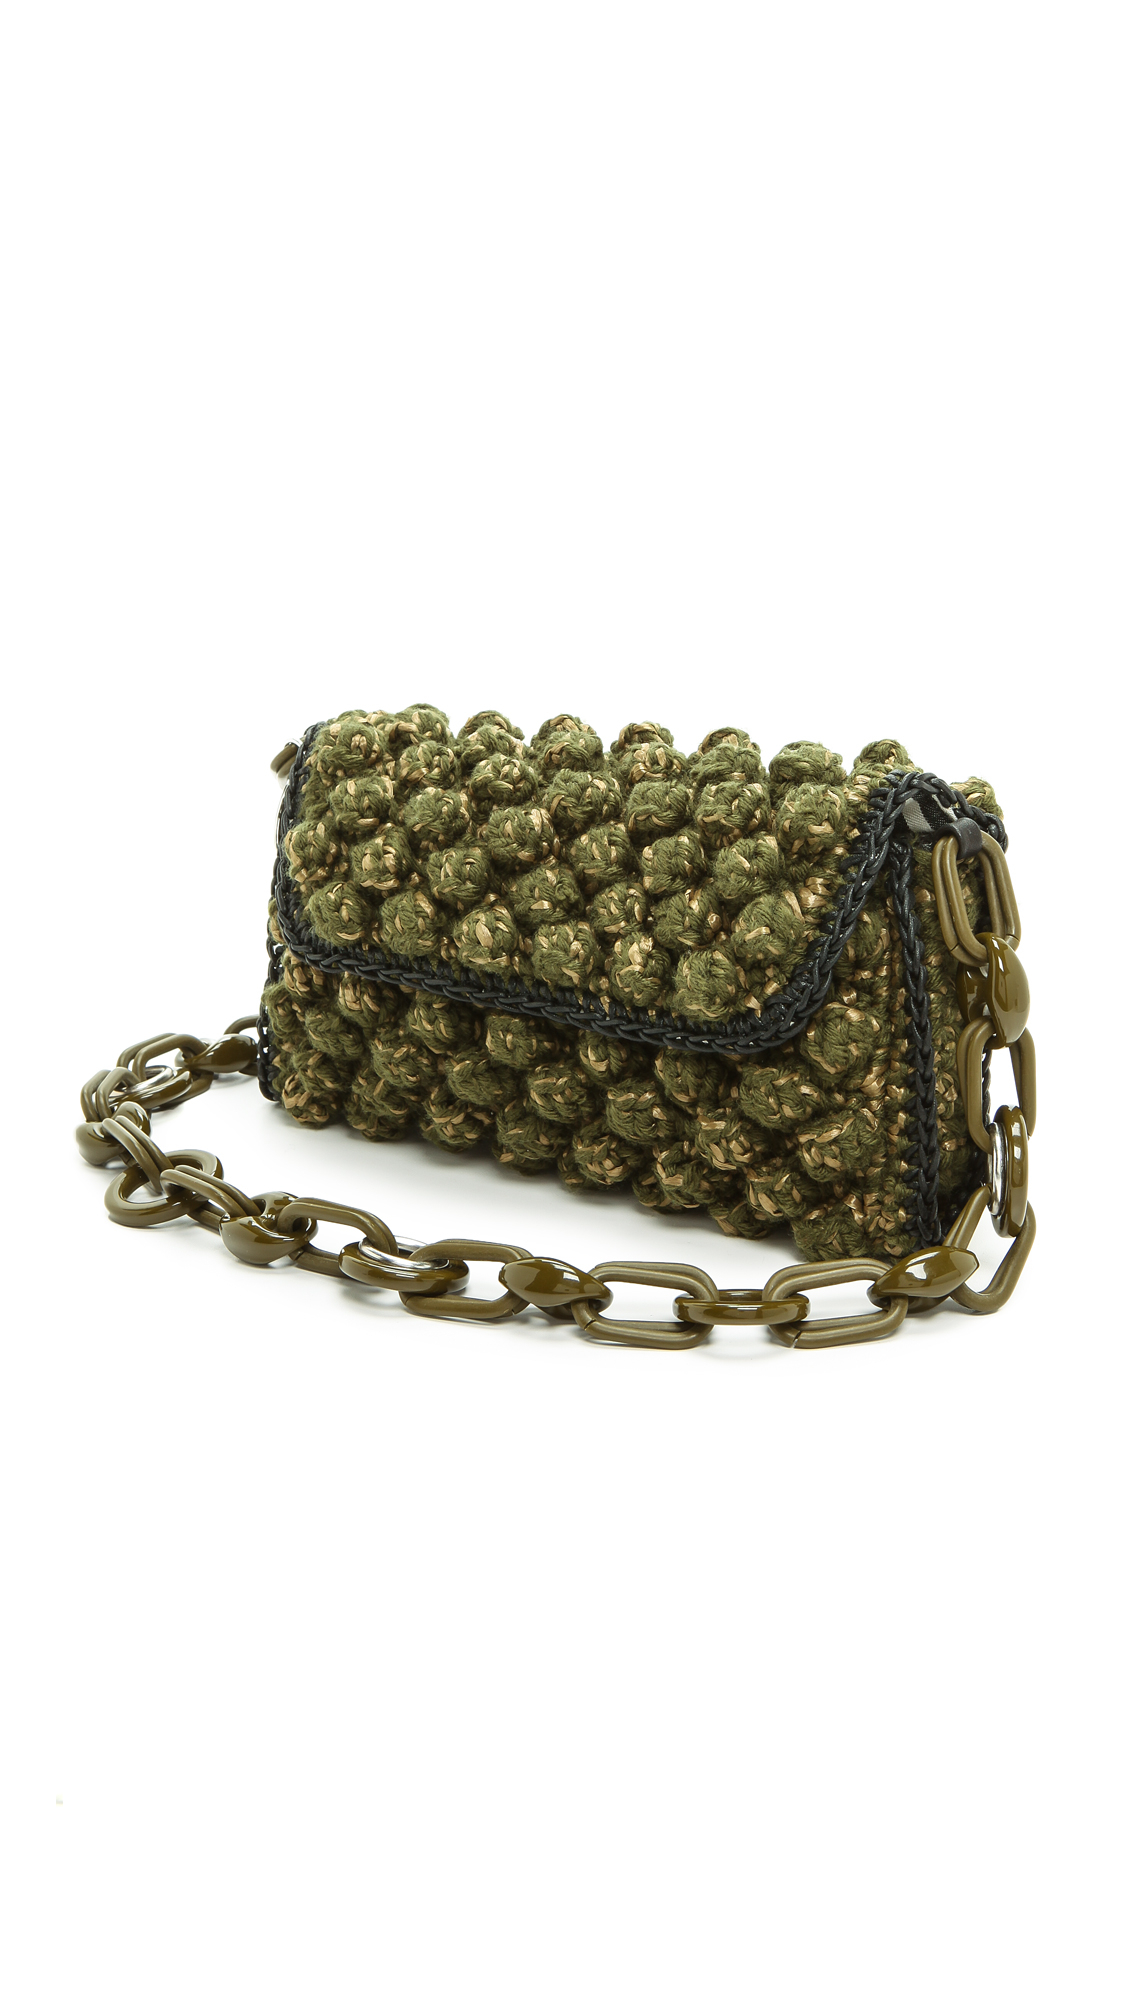 M Missoni Boucle Knit Bag - Olive in Natural - Lyst